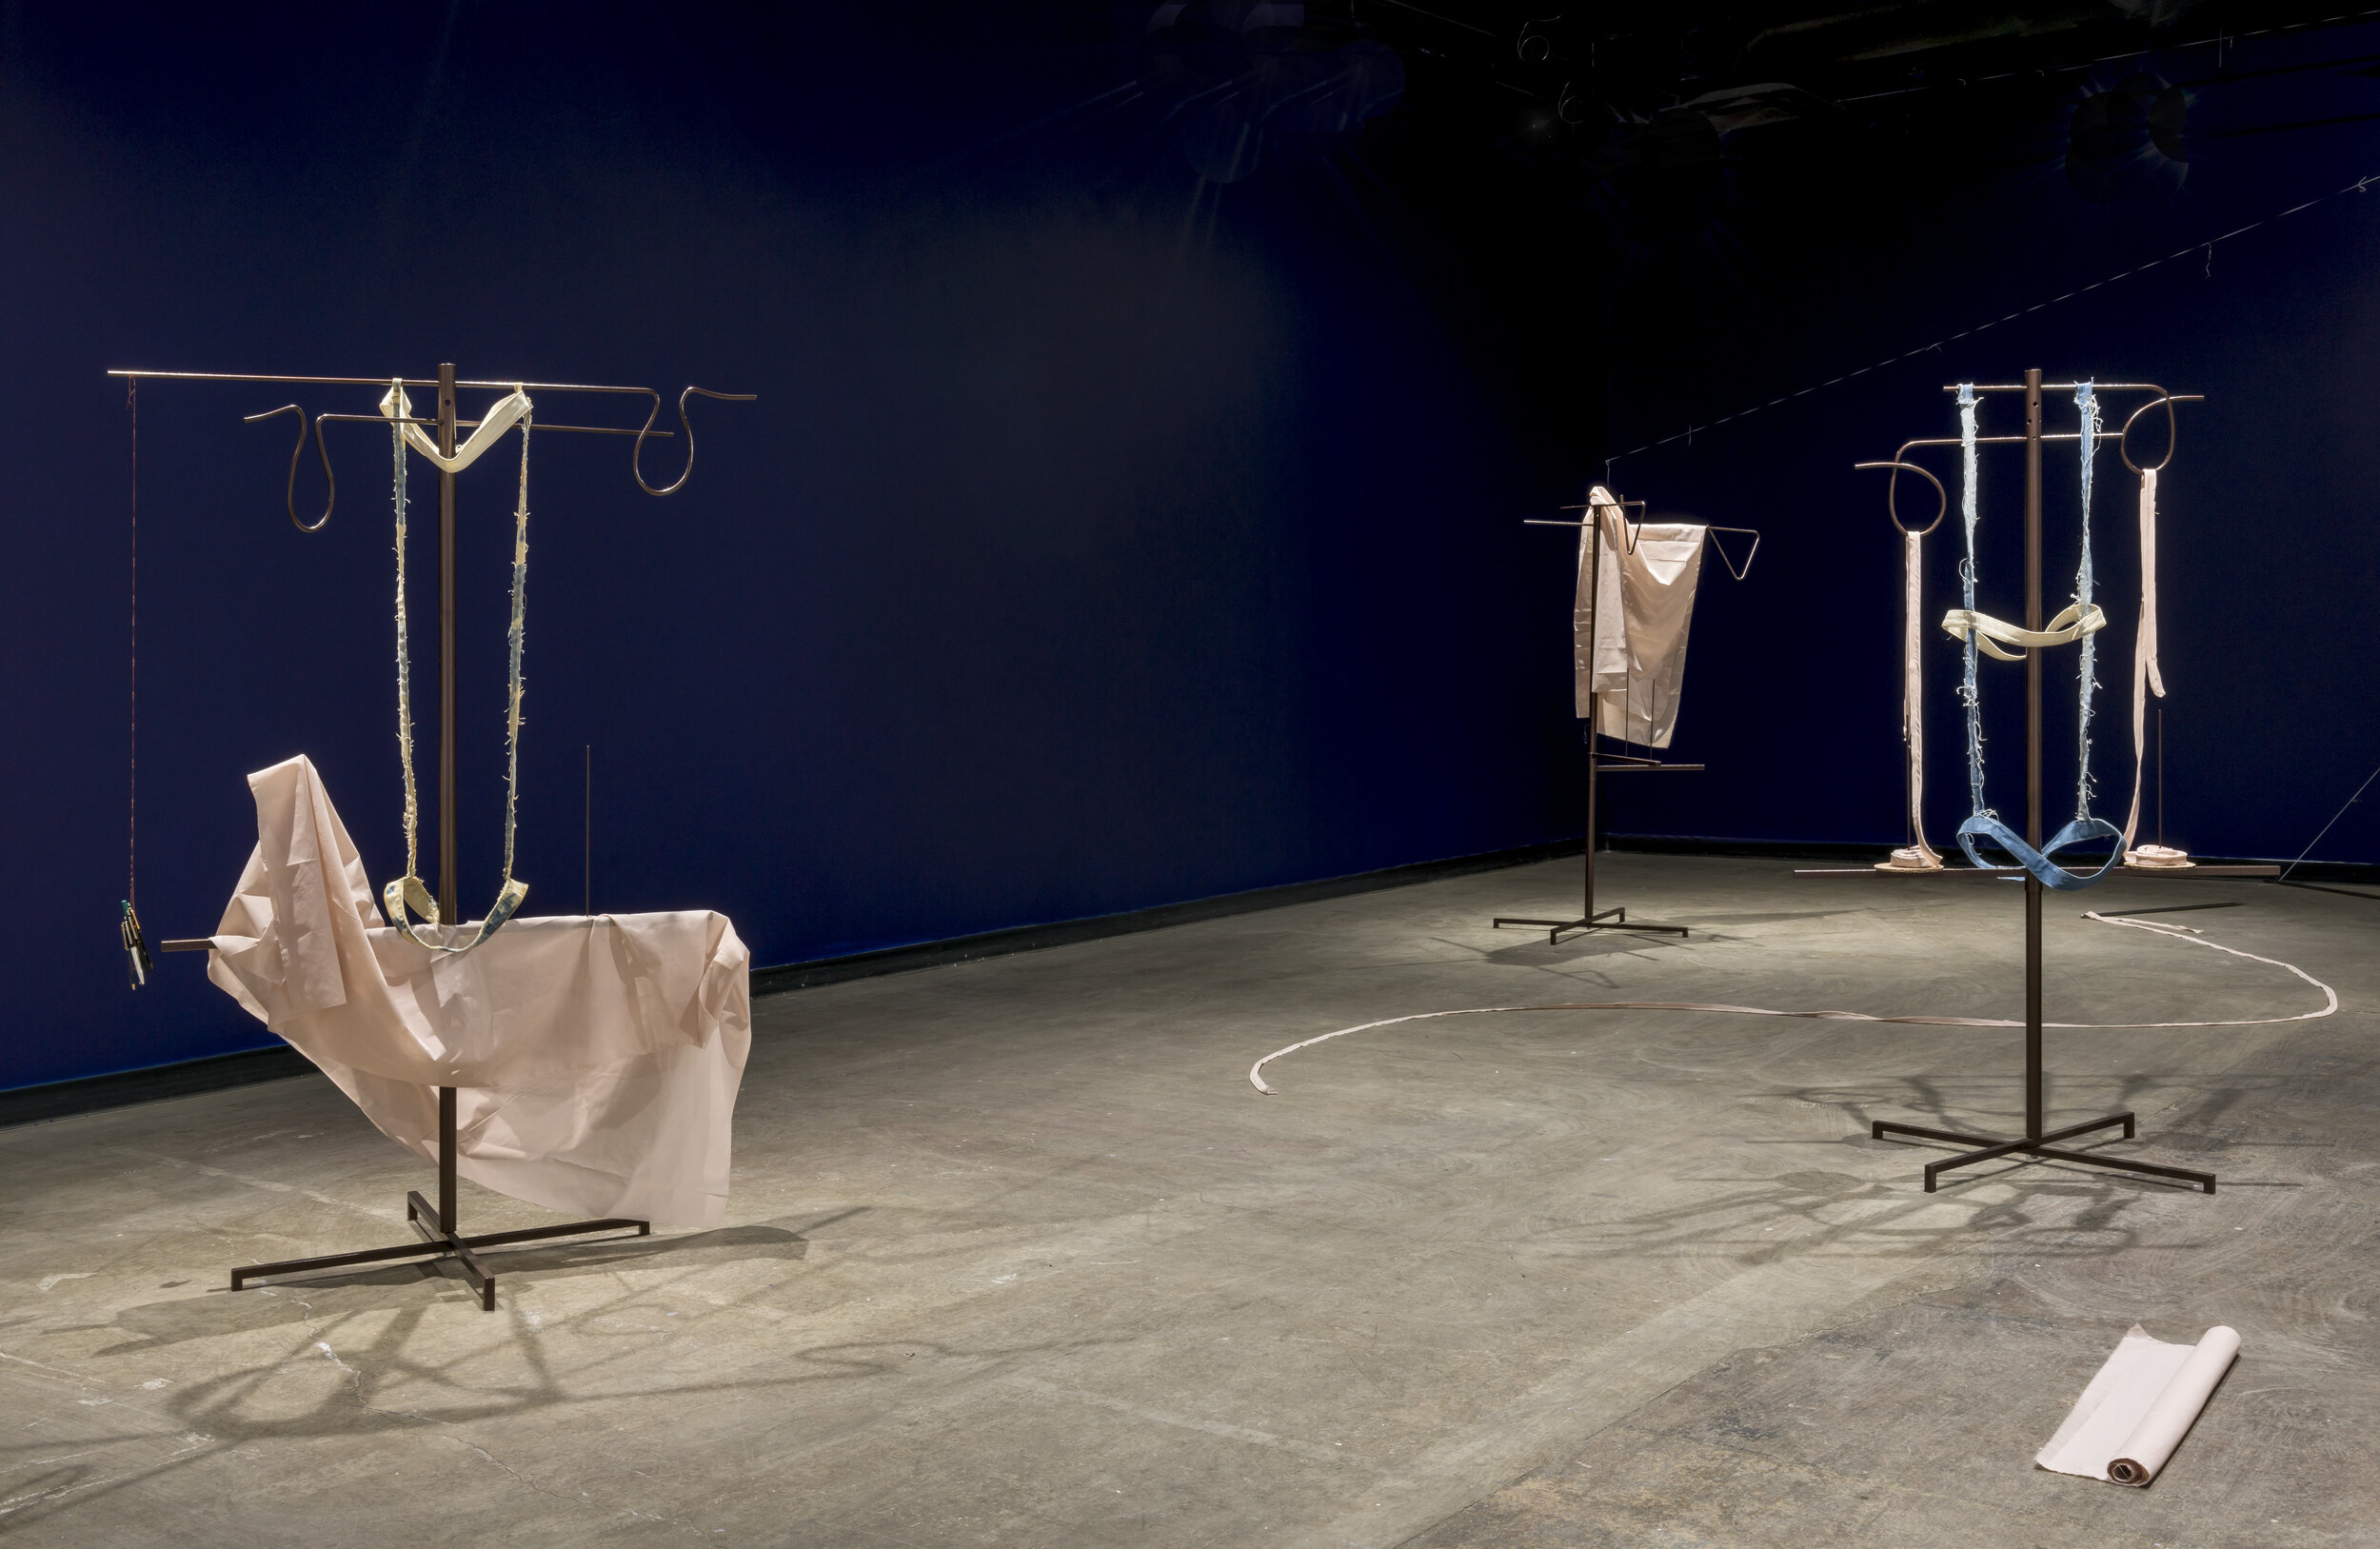  This is a wide view of the gallery for Karen Kraven’s exhibition, Lull. In this room, there are three free-standing structures. Each of these structures is a metal pole on a stand with a couple bars running through them, and pieces of fabric hanging